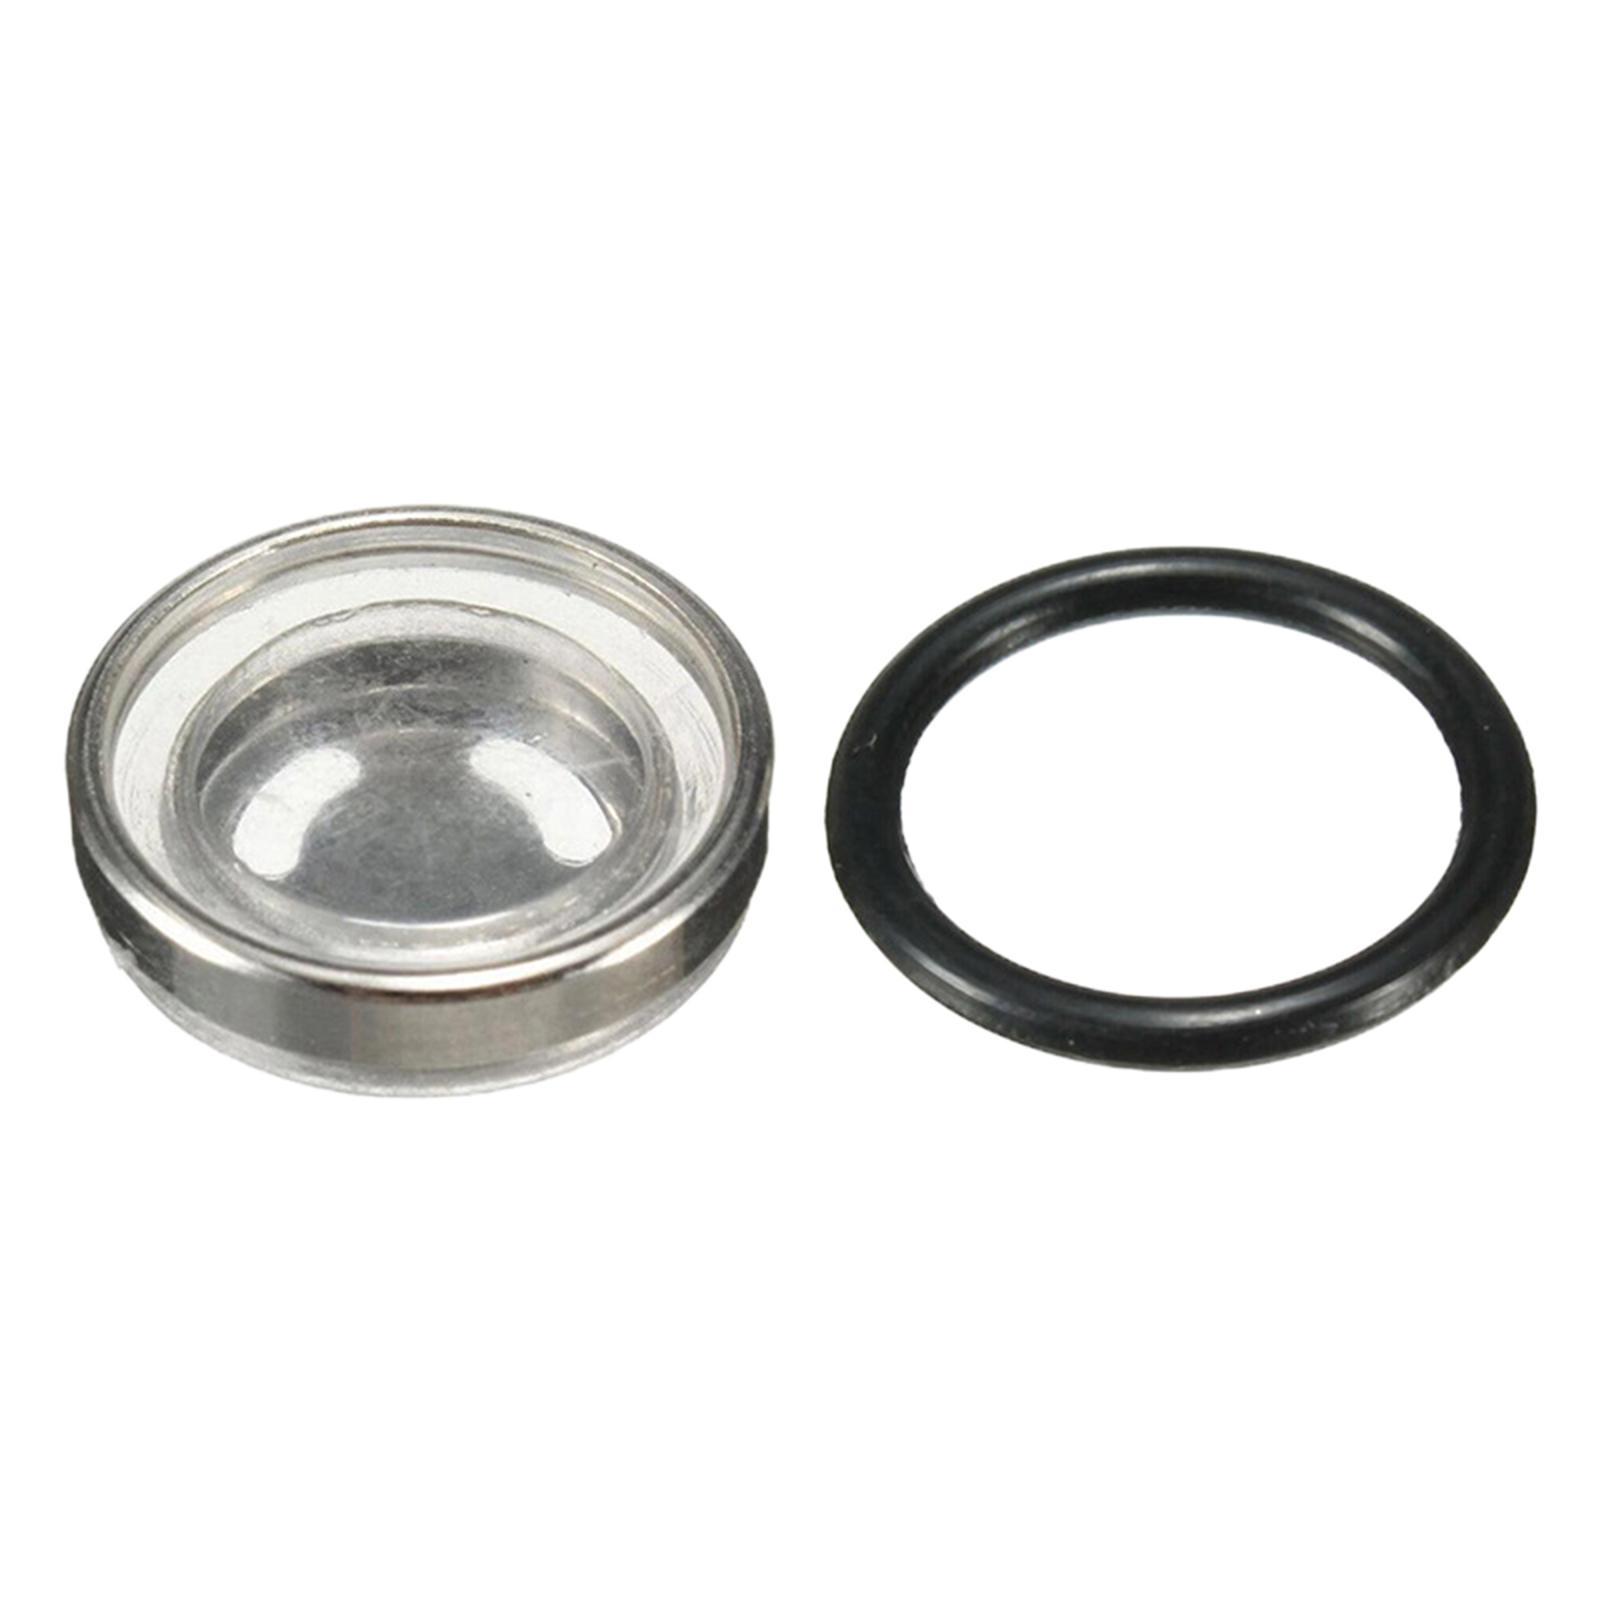 Oil Pump Sight Glass Universal Gasket Repair Parts for Motorcycle 10mm